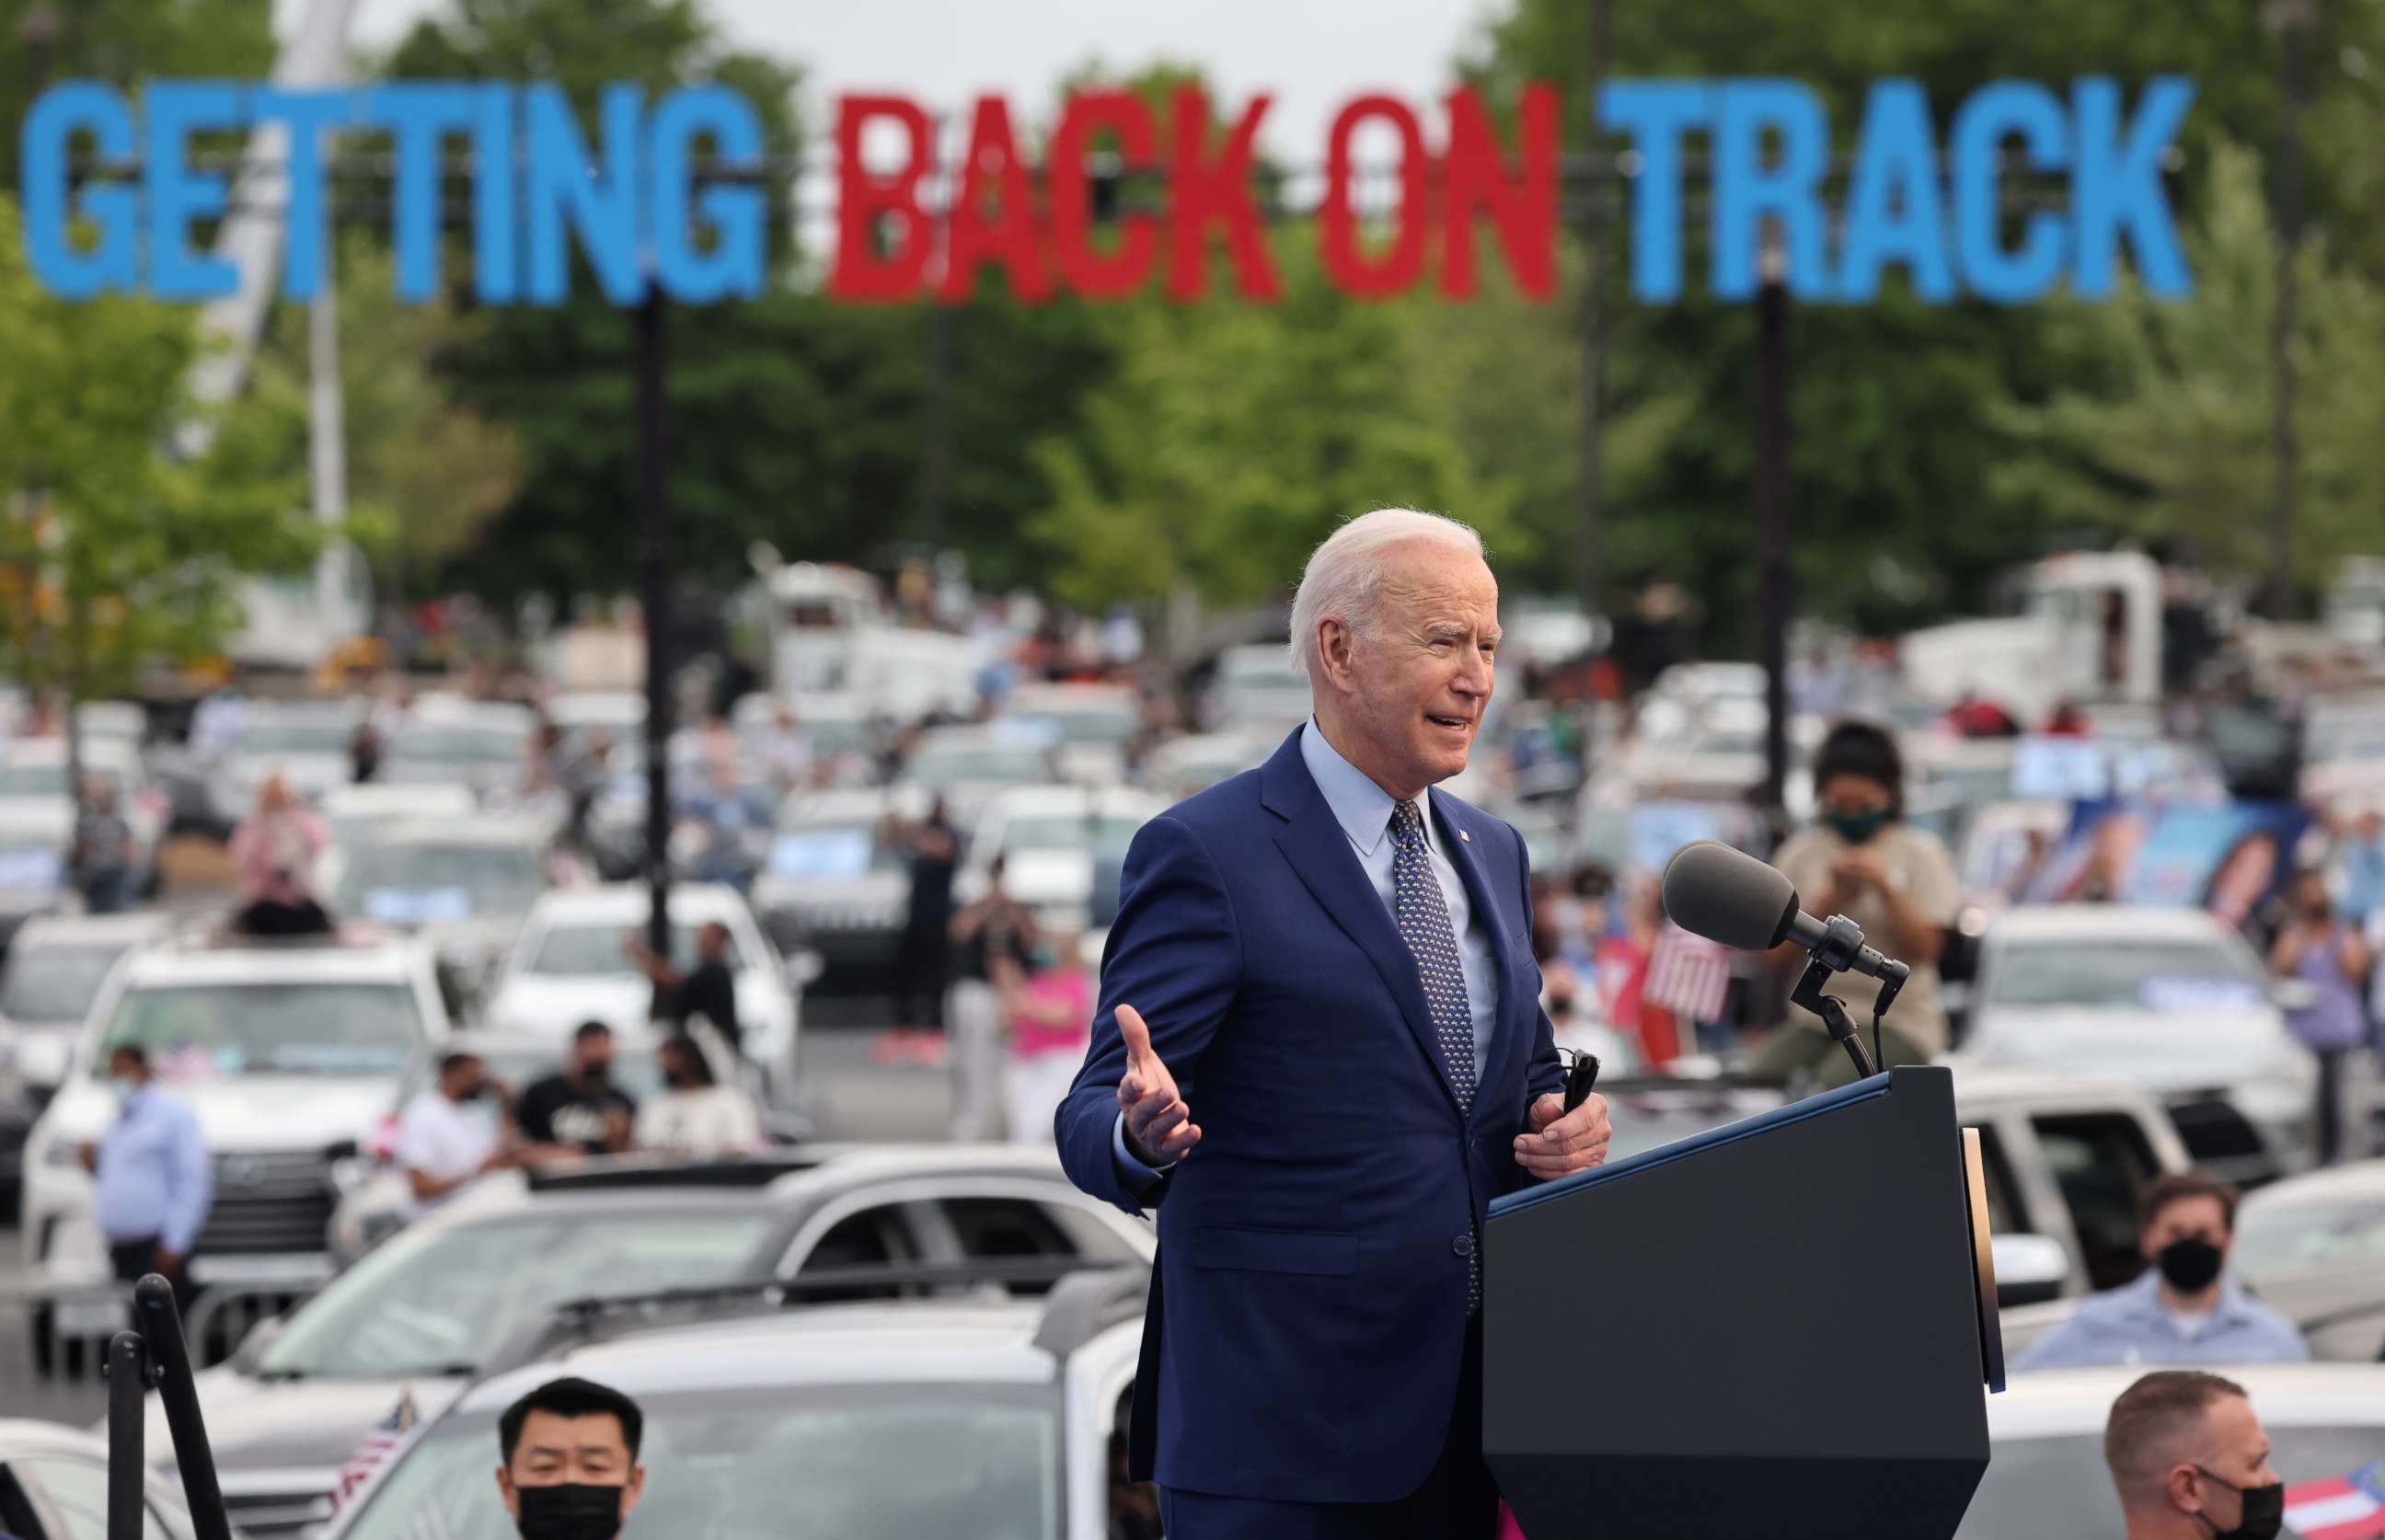 PHOTO: President Joe Biden attends the Democratic National Committee's "Back on Track" drive-in car rally to celebrate the president's 100th day in office at the Infinite Energy Center in Duluth, Ga., April 29, 2021.